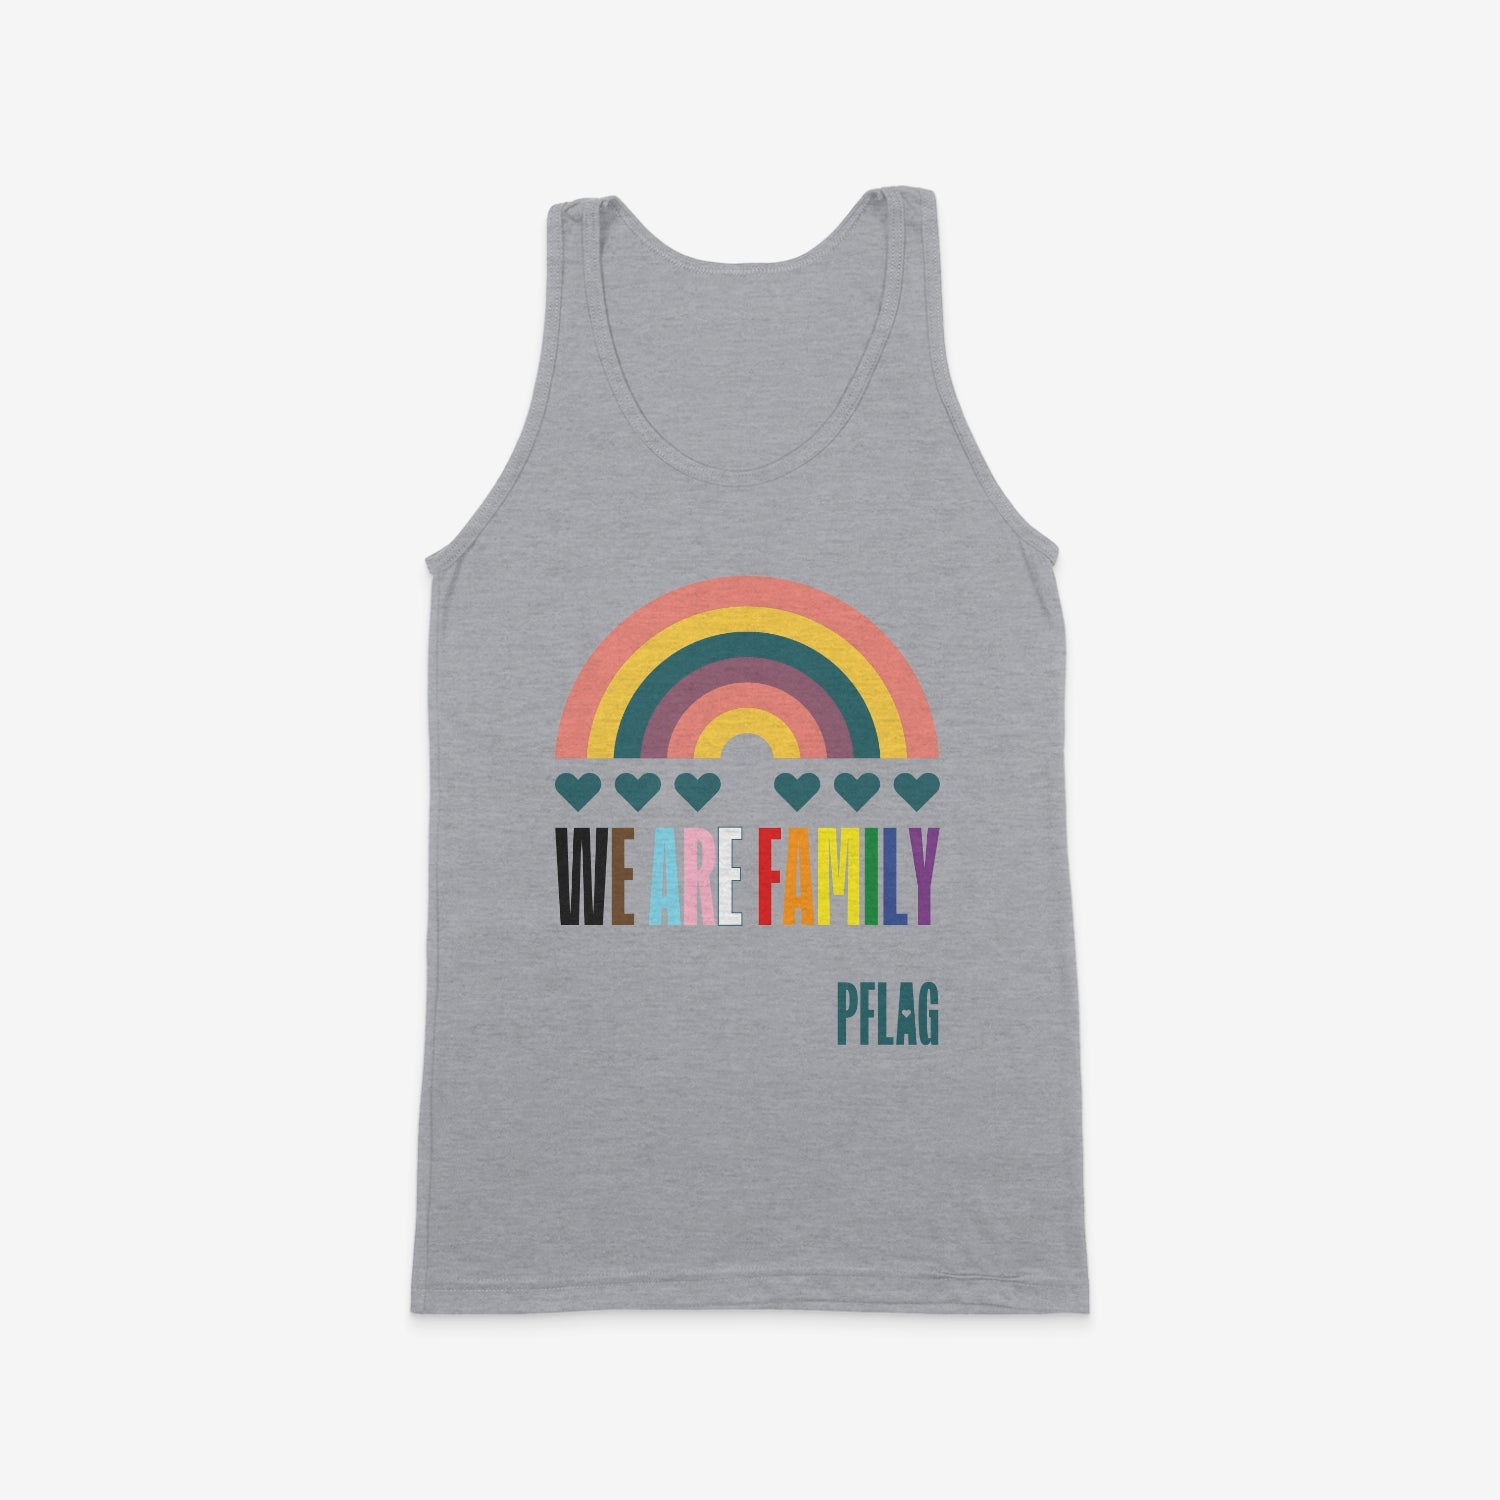 We Are Family - Wide-Cut Tank Top